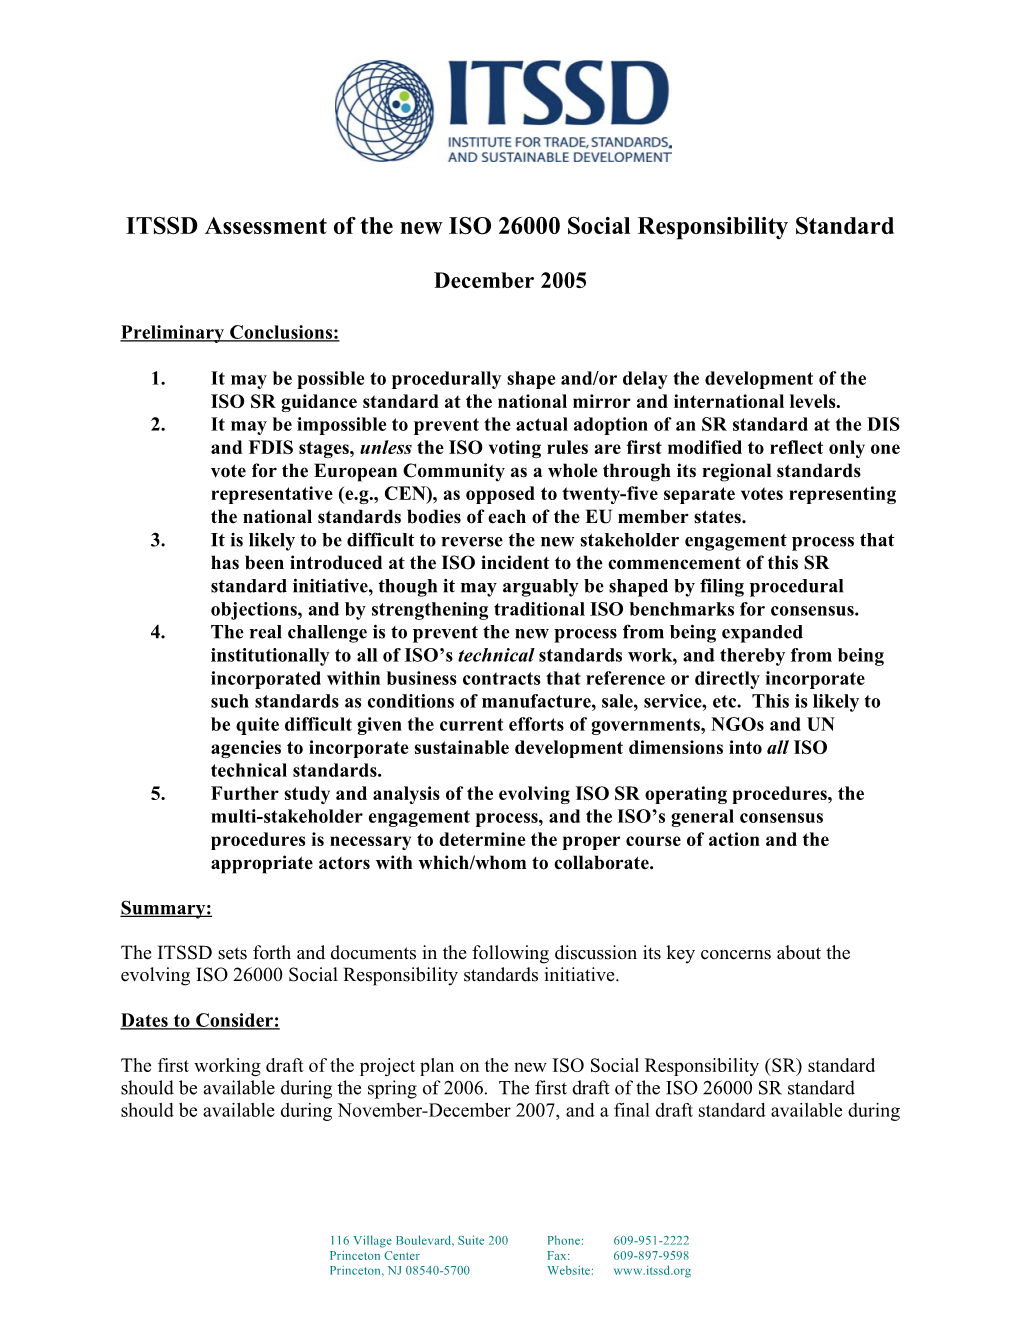 ITSSD Assessment of the New ISO 26000 Social Responsibility Standard